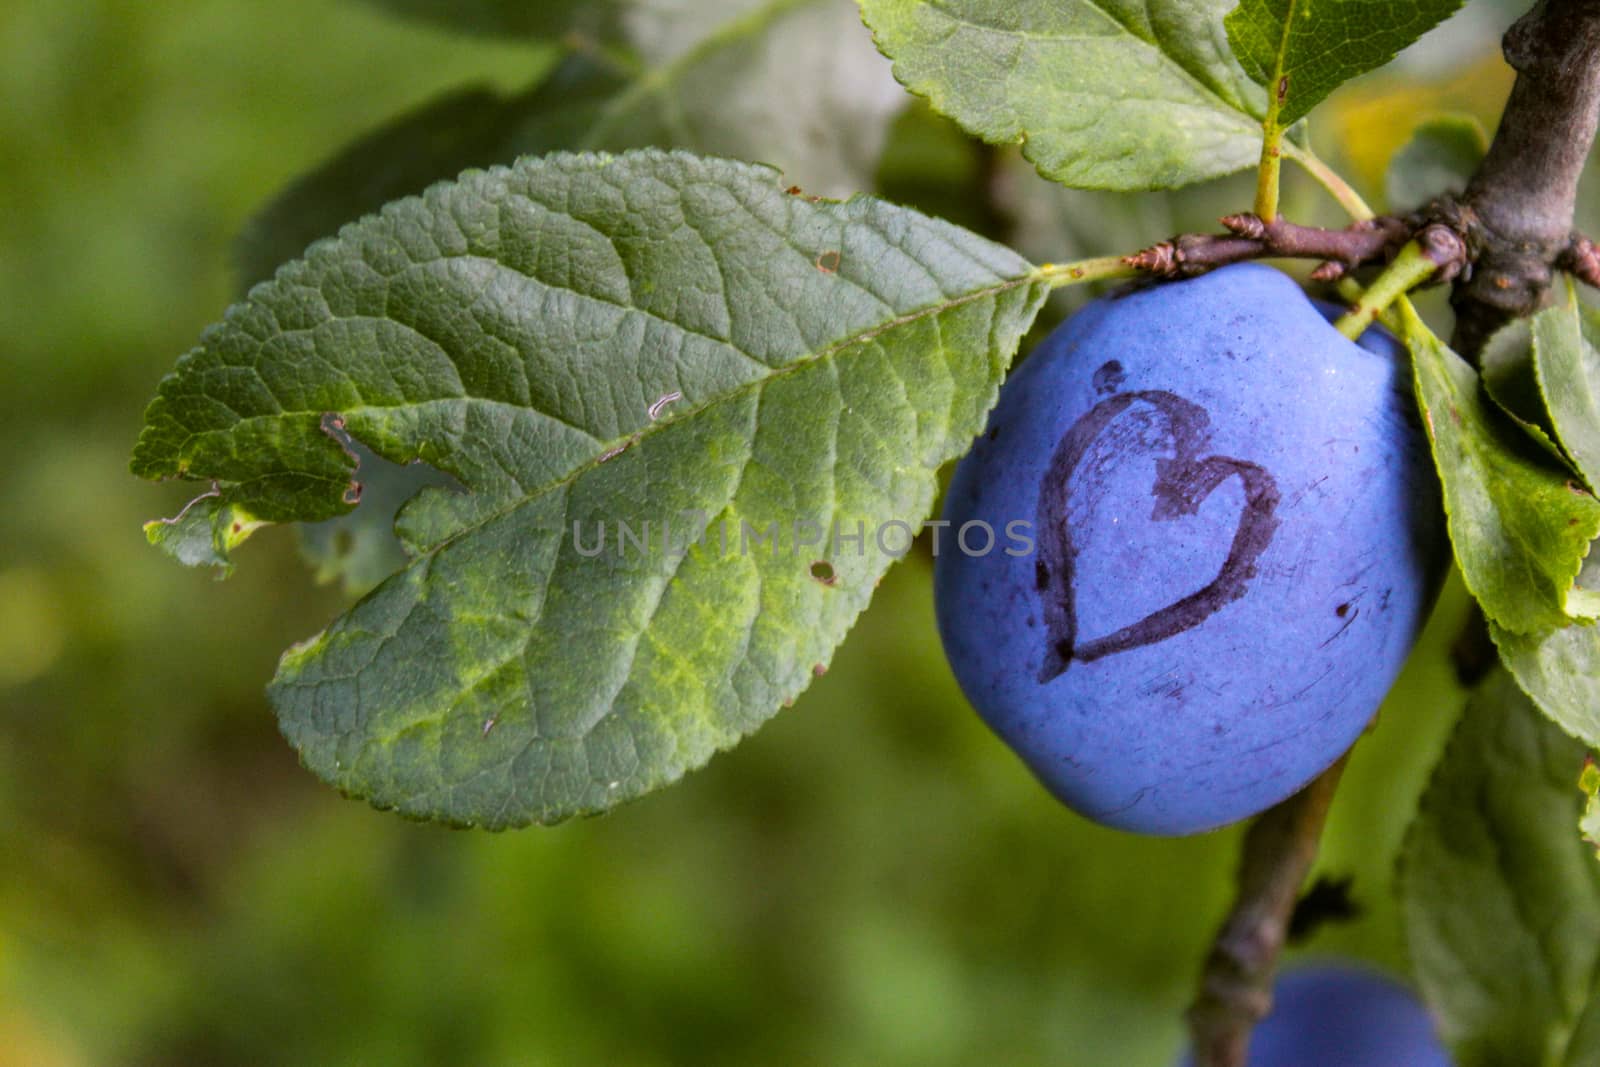 A blue ripe plum with a heart drawn on it. In addition to the ripe plum there is a leaf that is damaged which is in the shape of a heart. Zavidovići, Bosnia and Herzegovina.